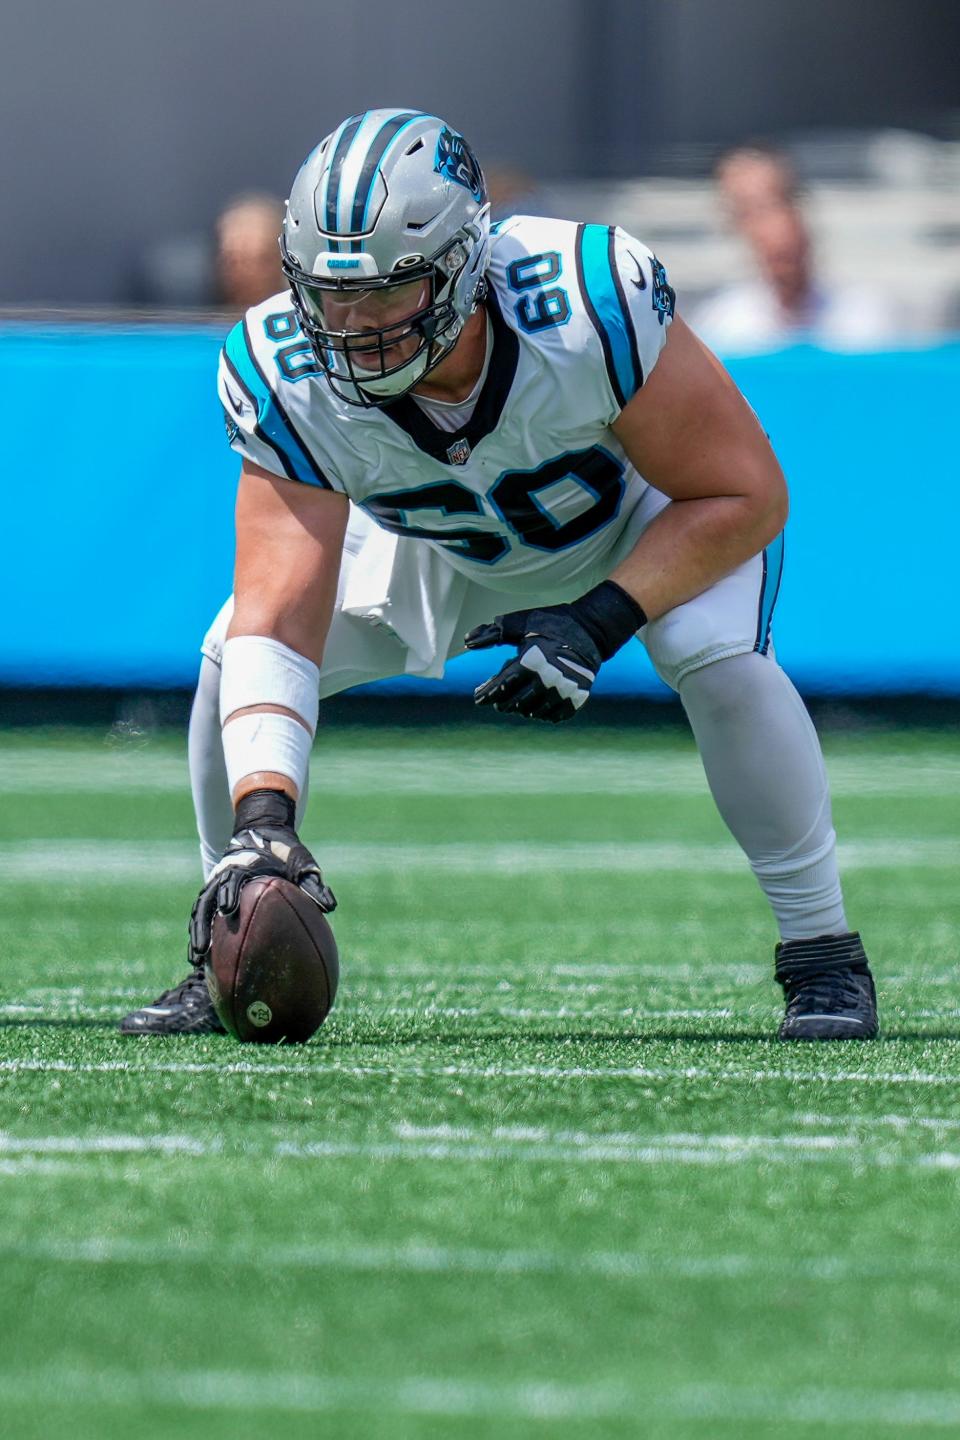 Carolina Panthers guard Pat Elflein (60) during the first quarter against the Cleveland Browns at Bank of America Stadium in Charlotte on Sept. 11, 2022.